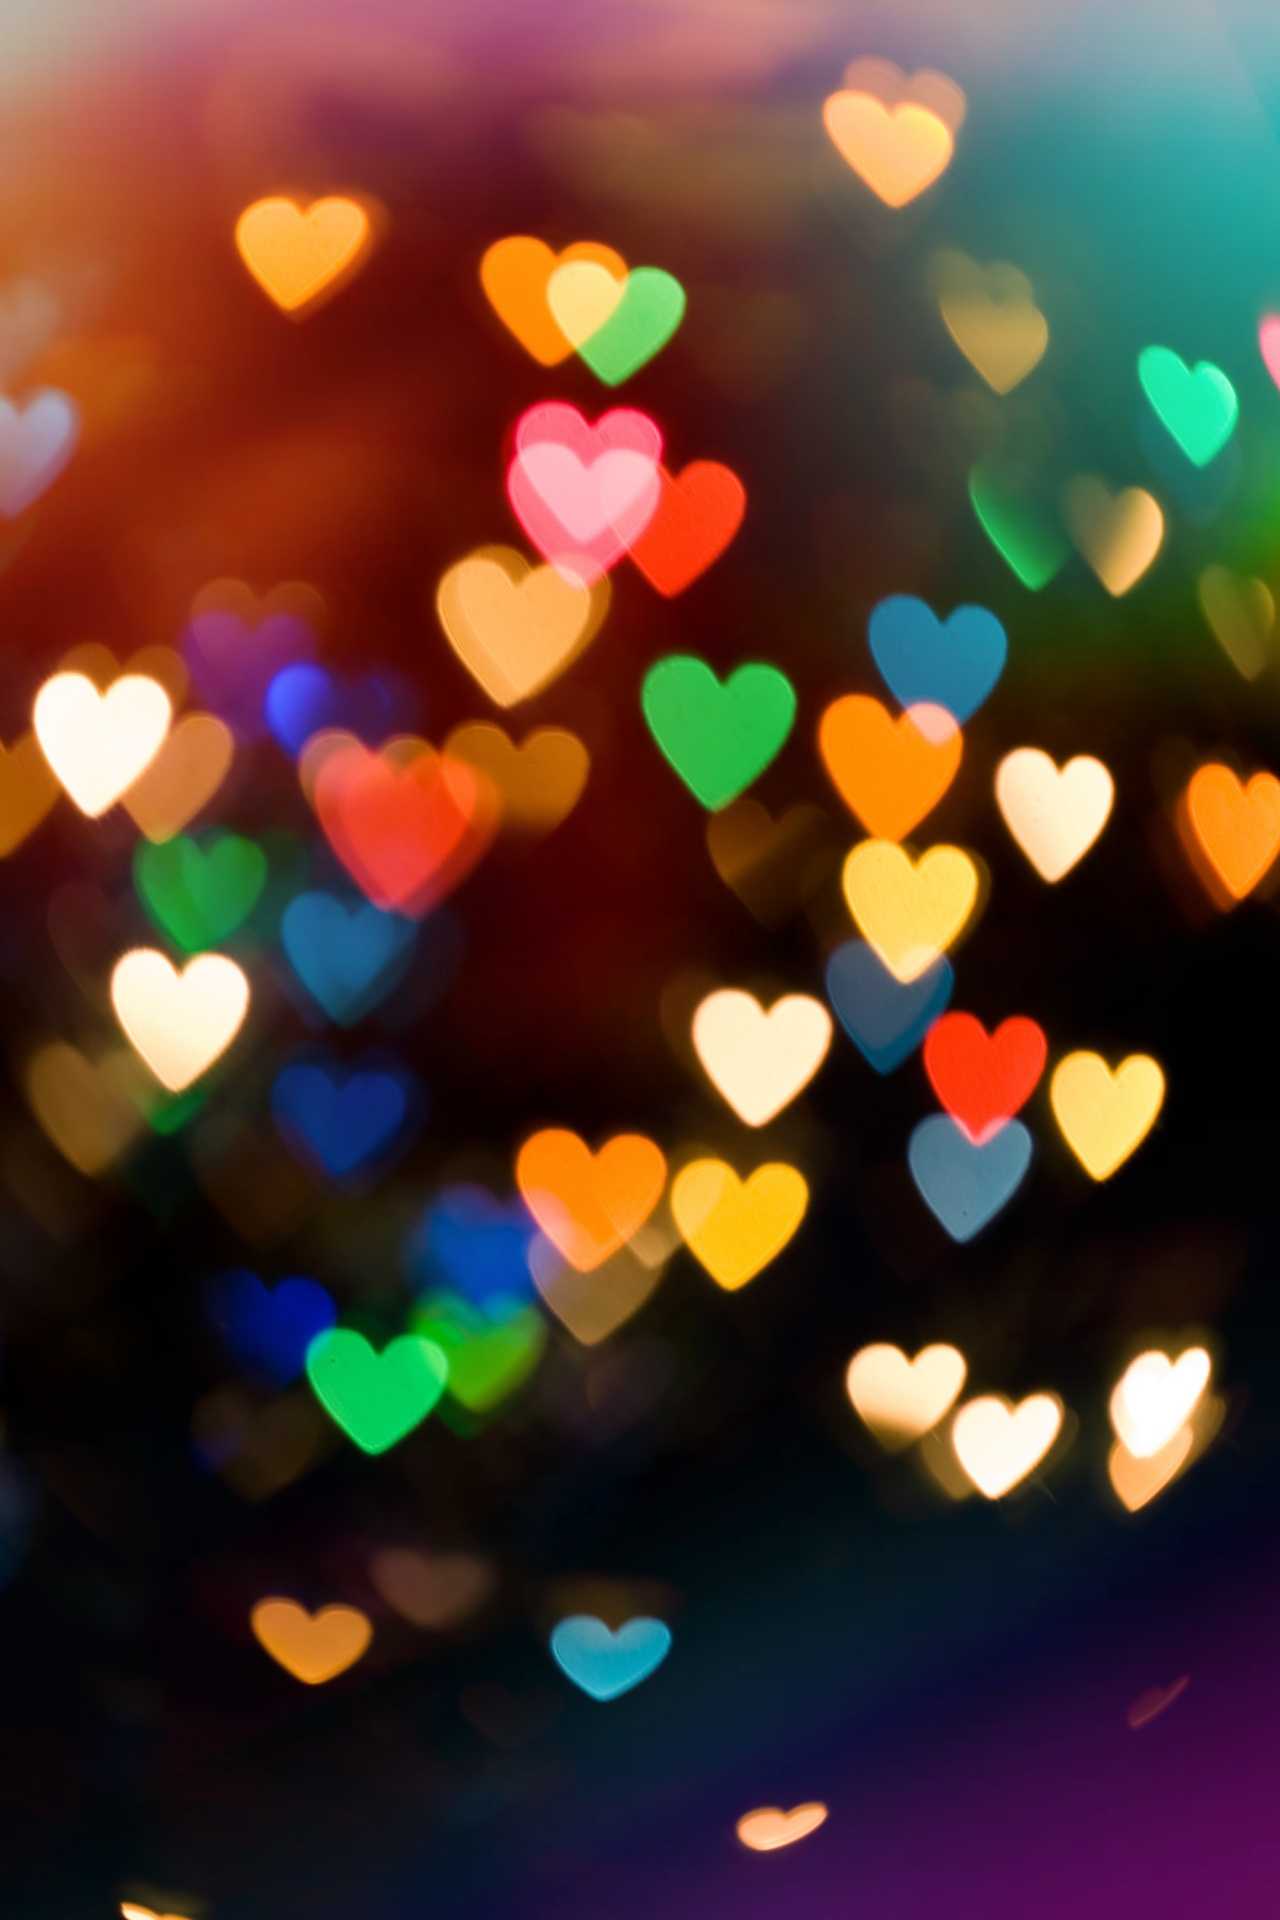 Love Background - KoLPaPer - Awesome Free HD Wallpapers